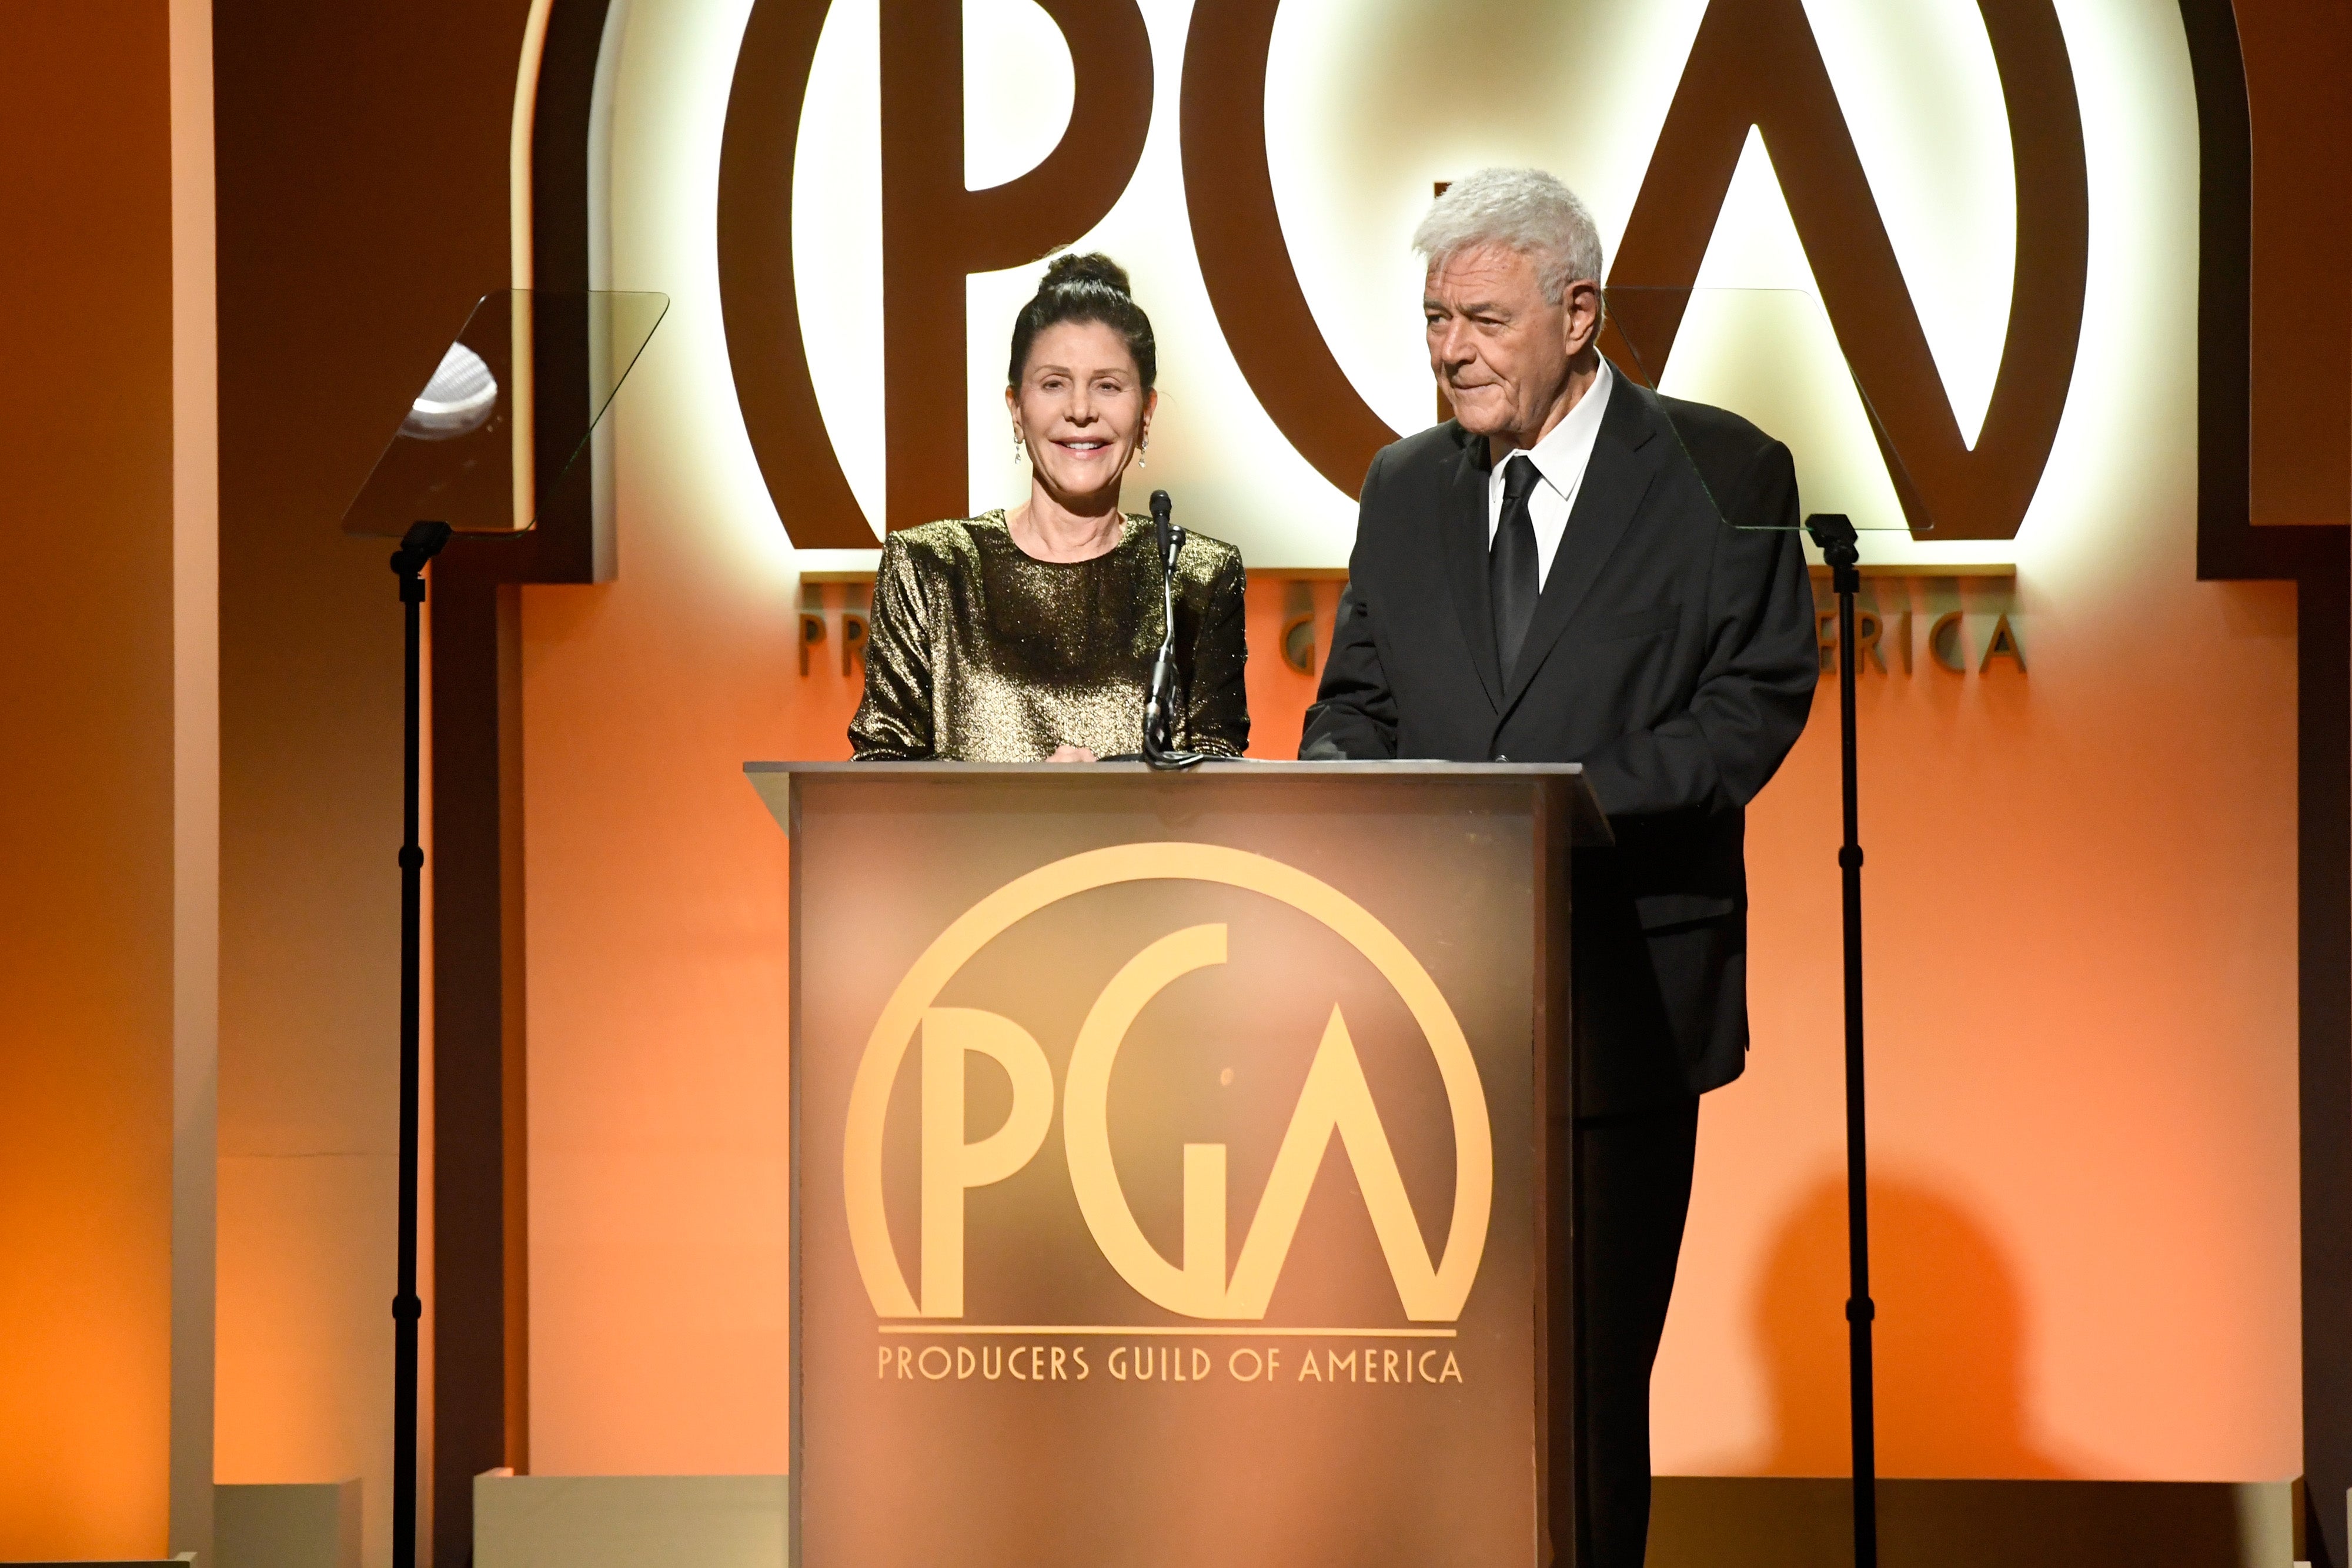 Donner with his wife in 2019 at the Producers Guild awards ceremony